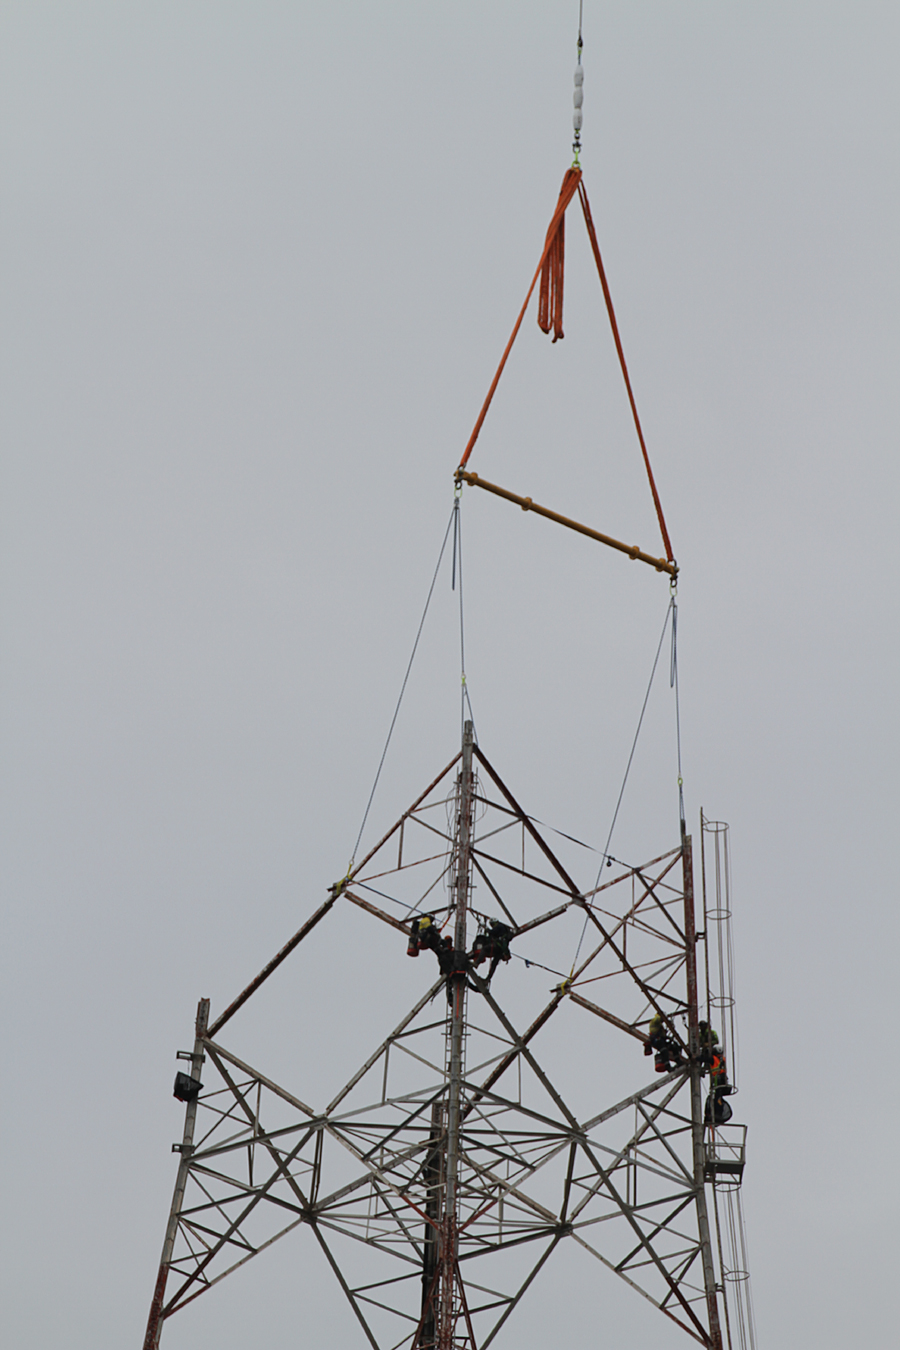 TCN-9 TV Transmission Tower in Sydney, NSW